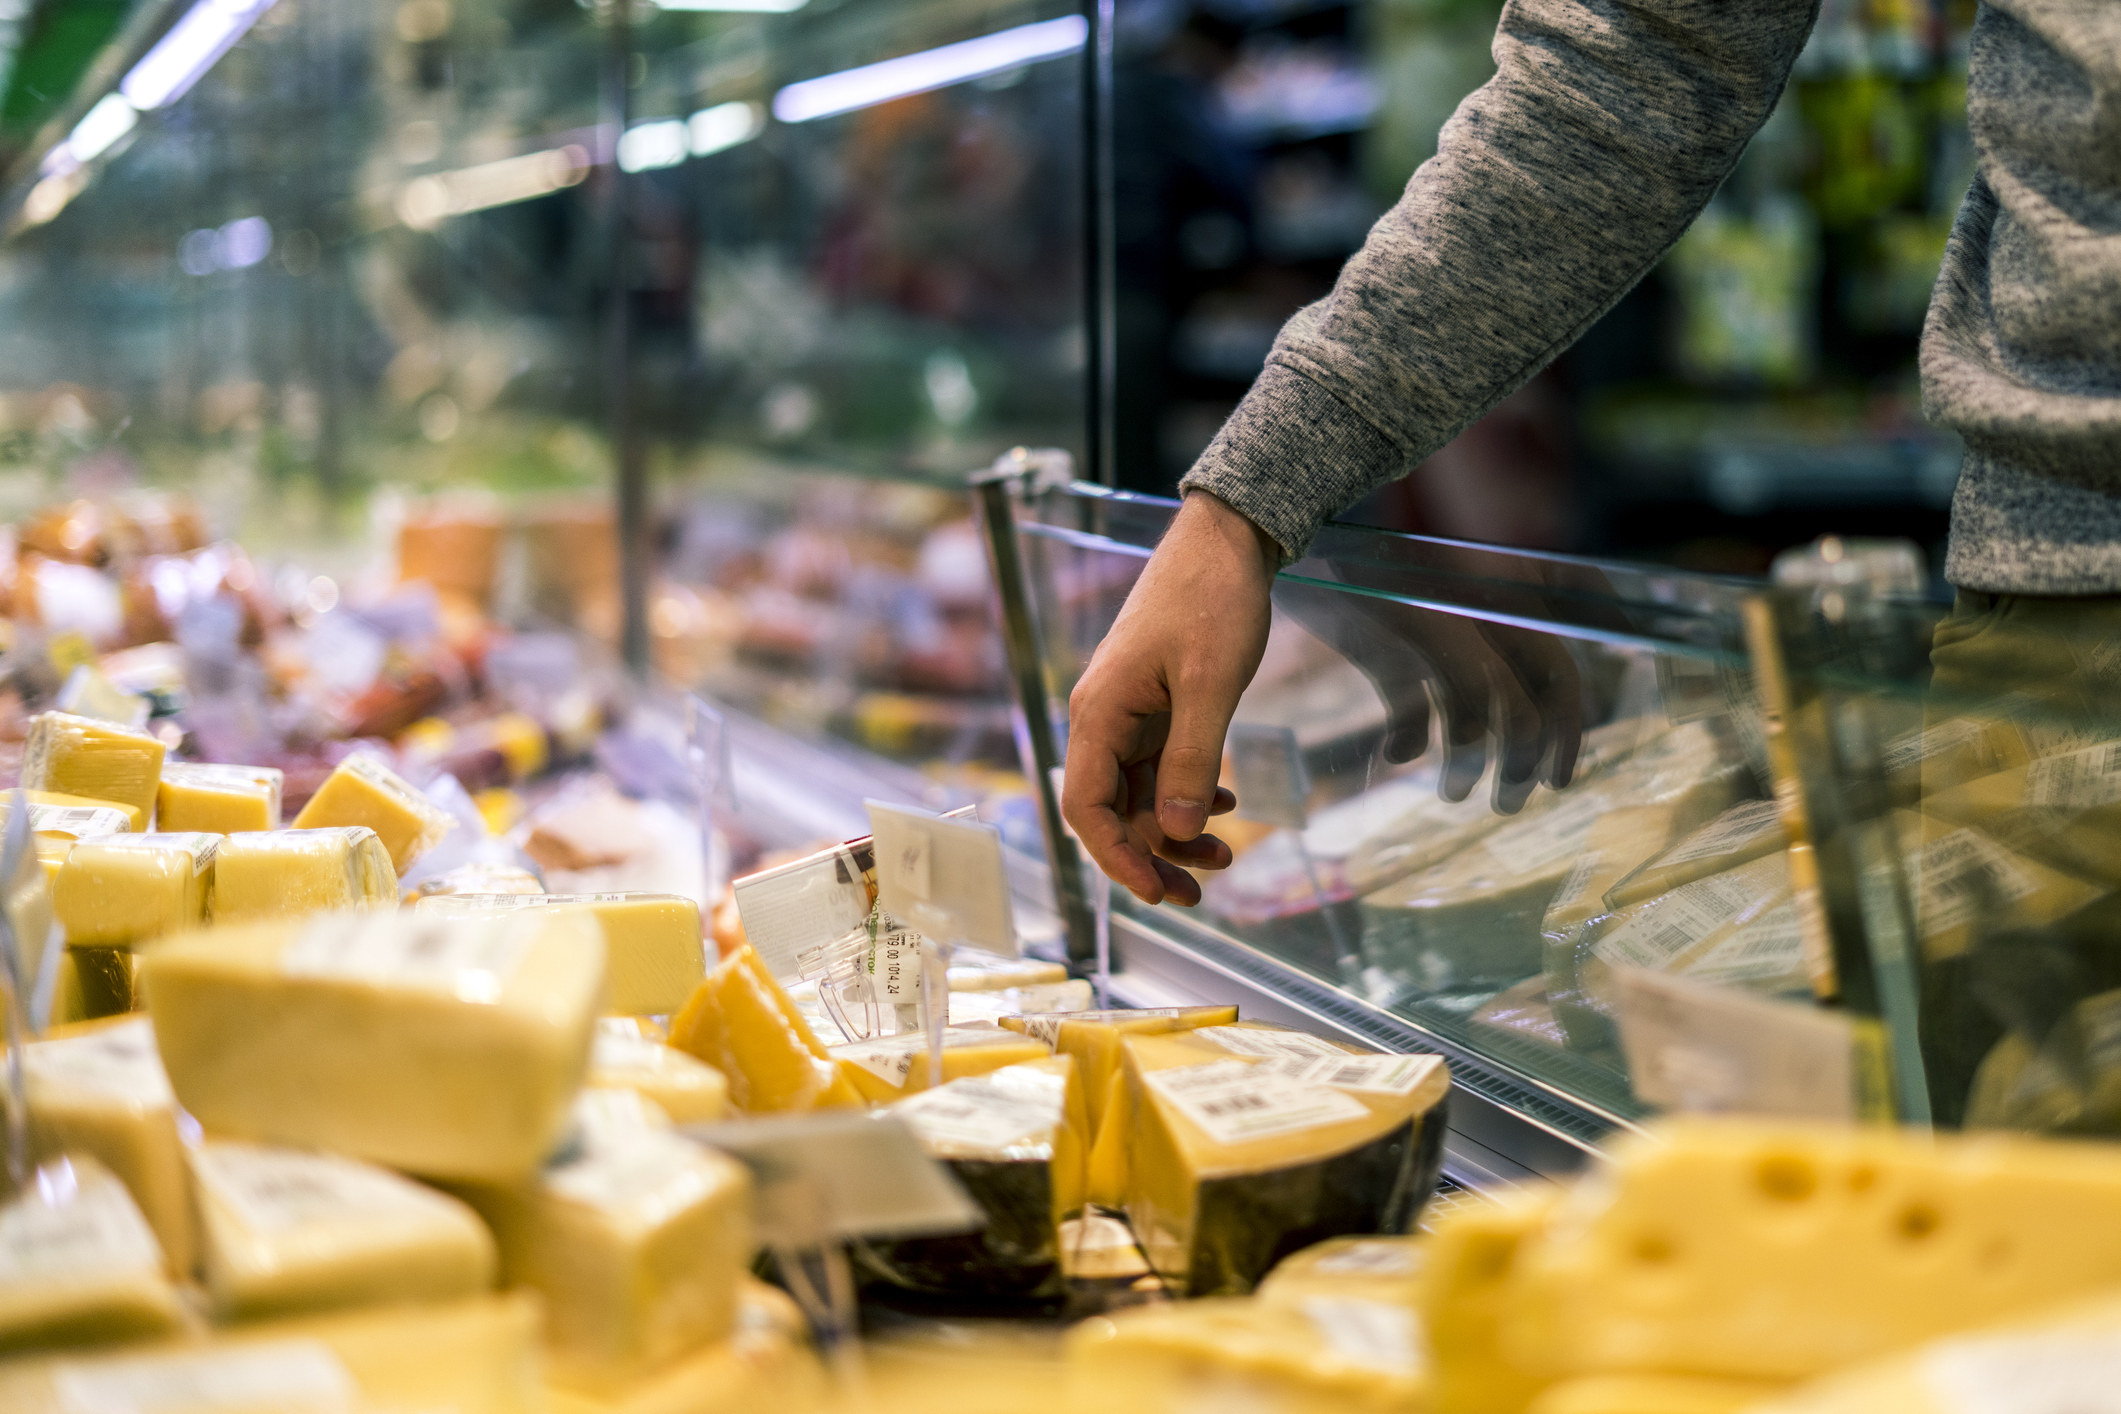 A person shopping for cheese.